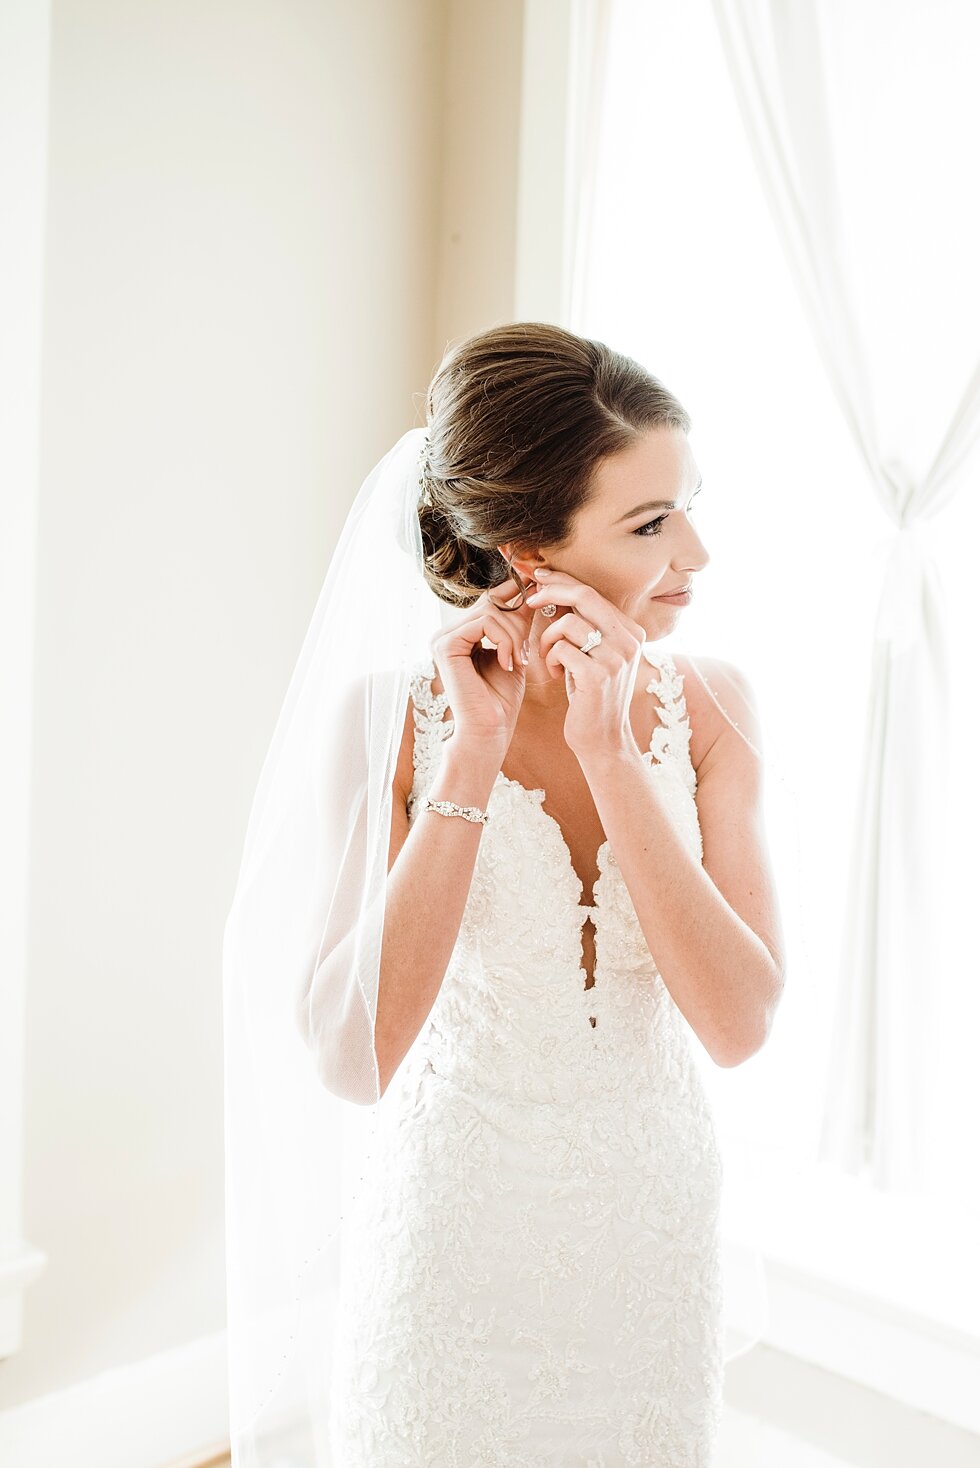  Bride adjusting her earrings and finalizing the last touches of her appearance before she walks down the aisle. wedding ceremony details stunning photography married midwest louisville kentucky #weddingphoto #love #justmarried #midwestphotographer #